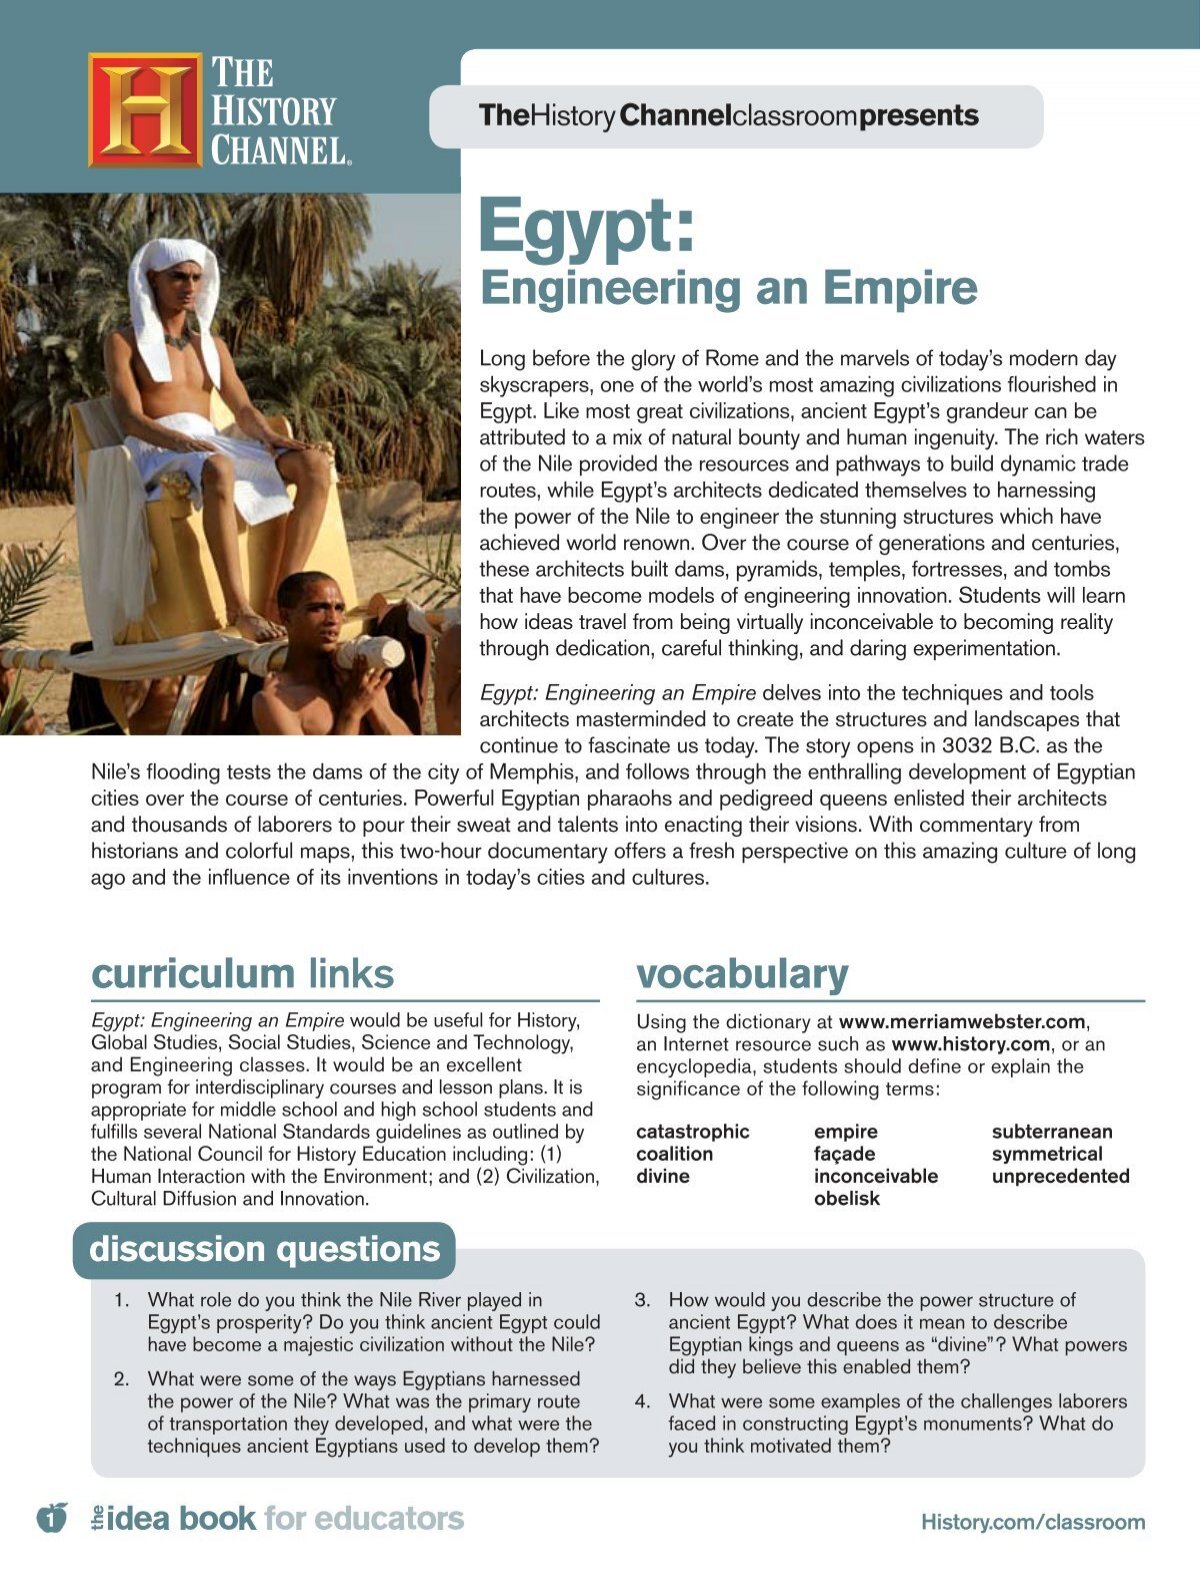 egypt-engineering-an-empire